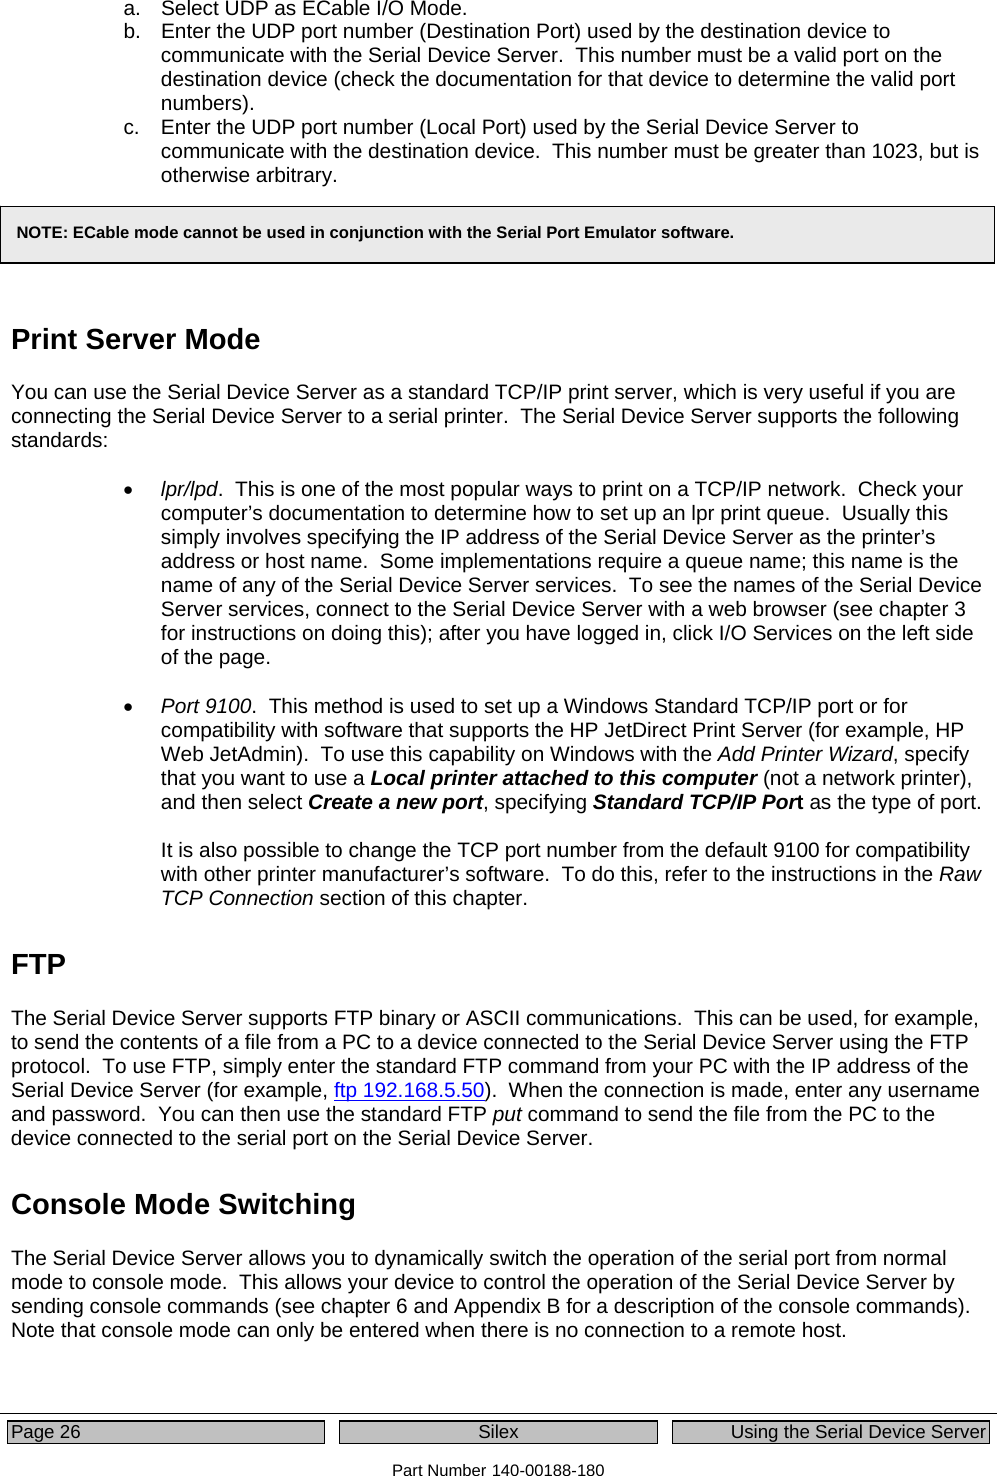  Page 26  Silex  Using the Serial Device Server Part Number 140-00188-180 a.  Select UDP as ECable I/O Mode. b.  Enter the UDP port number (Destination Port) used by the destination device to communicate with the Serial Device Server.  This number must be a valid port on the destination device (check the documentation for that device to determine the valid port numbers). c.  Enter the UDP port number (Local Port) used by the Serial Device Server to communicate with the destination device.  This number must be greater than 1023, but is otherwise arbitrary.    Print Server Mode You can use the Serial Device Server as a standard TCP/IP print server, which is very useful if you are connecting the Serial Device Server to a serial printer.  The Serial Device Server supports the following standards:  • lpr/lpd.  This is one of the most popular ways to print on a TCP/IP network.  Check your computer’s documentation to determine how to set up an lpr print queue.  Usually this simply involves specifying the IP address of the Serial Device Server as the printer’s address or host name.  Some implementations require a queue name; this name is the name of any of the Serial Device Server services.  To see the names of the Serial Device Server services, connect to the Serial Device Server with a web browser (see chapter 3 for instructions on doing this); after you have logged in, click I/O Services on the left side of the page.   • Port 9100.  This method is used to set up a Windows Standard TCP/IP port or for compatibility with software that supports the HP JetDirect Print Server (for example, HP Web JetAdmin).  To use this capability on Windows with the Add Printer Wizard, specify that you want to use a Local printer attached to this computer (not a network printer), and then select Create a new port, specifying Standard TCP/IP Port as the type of port.  It is also possible to change the TCP port number from the default 9100 for compatibility with other printer manufacturer’s software.  To do this, refer to the instructions in the Raw TCP Connection section of this chapter. FTP The Serial Device Server supports FTP binary or ASCII communications.  This can be used, for example, to send the contents of a file from a PC to a device connected to the Serial Device Server using the FTP protocol.  To use FTP, simply enter the standard FTP command from your PC with the IP address of the Serial Device Server (for example, ftp 192.168.5.50).  When the connection is made, enter any username and password.  You can then use the standard FTP put command to send the file from the PC to the device connected to the serial port on the Serial Device Server. Console Mode Switching The Serial Device Server allows you to dynamically switch the operation of the serial port from normal mode to console mode.  This allows your device to control the operation of the Serial Device Server by sending console commands (see chapter 6 and Appendix B for a description of the console commands).  Note that console mode can only be entered when there is no connection to a remote host.  NOTE: ECable mode cannot be used in conjunction with the Serial Port Emulator software. 